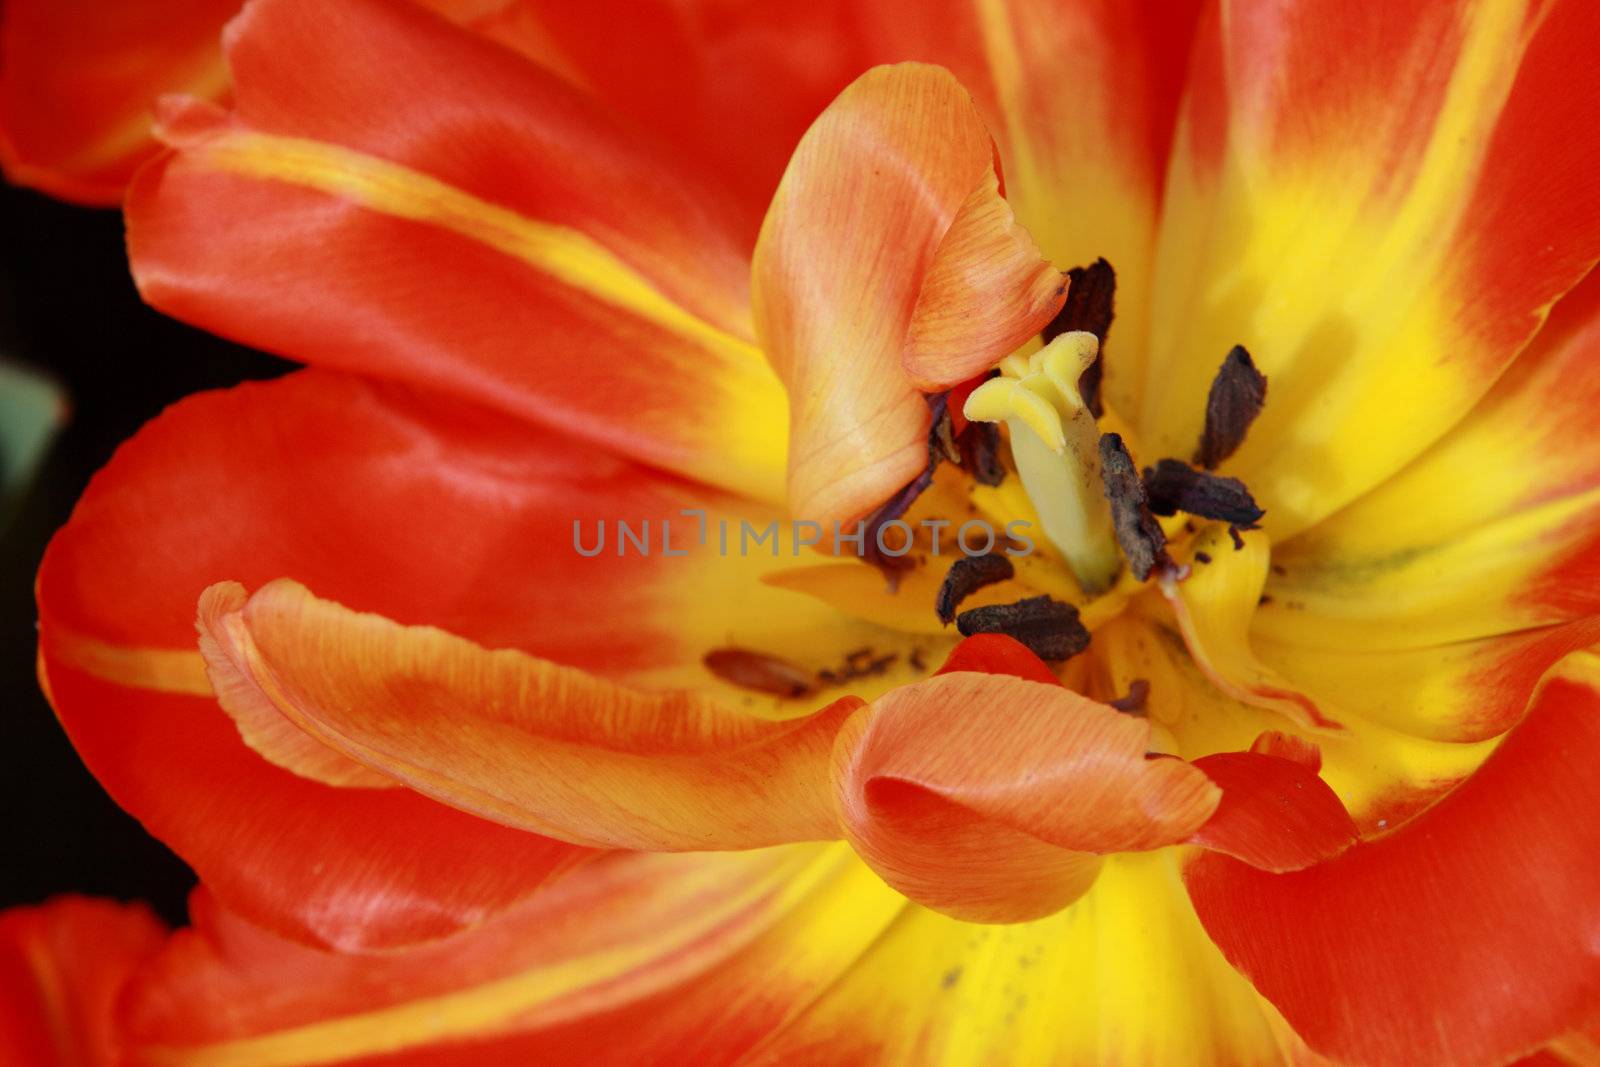 abtract picture of red tulip, close up